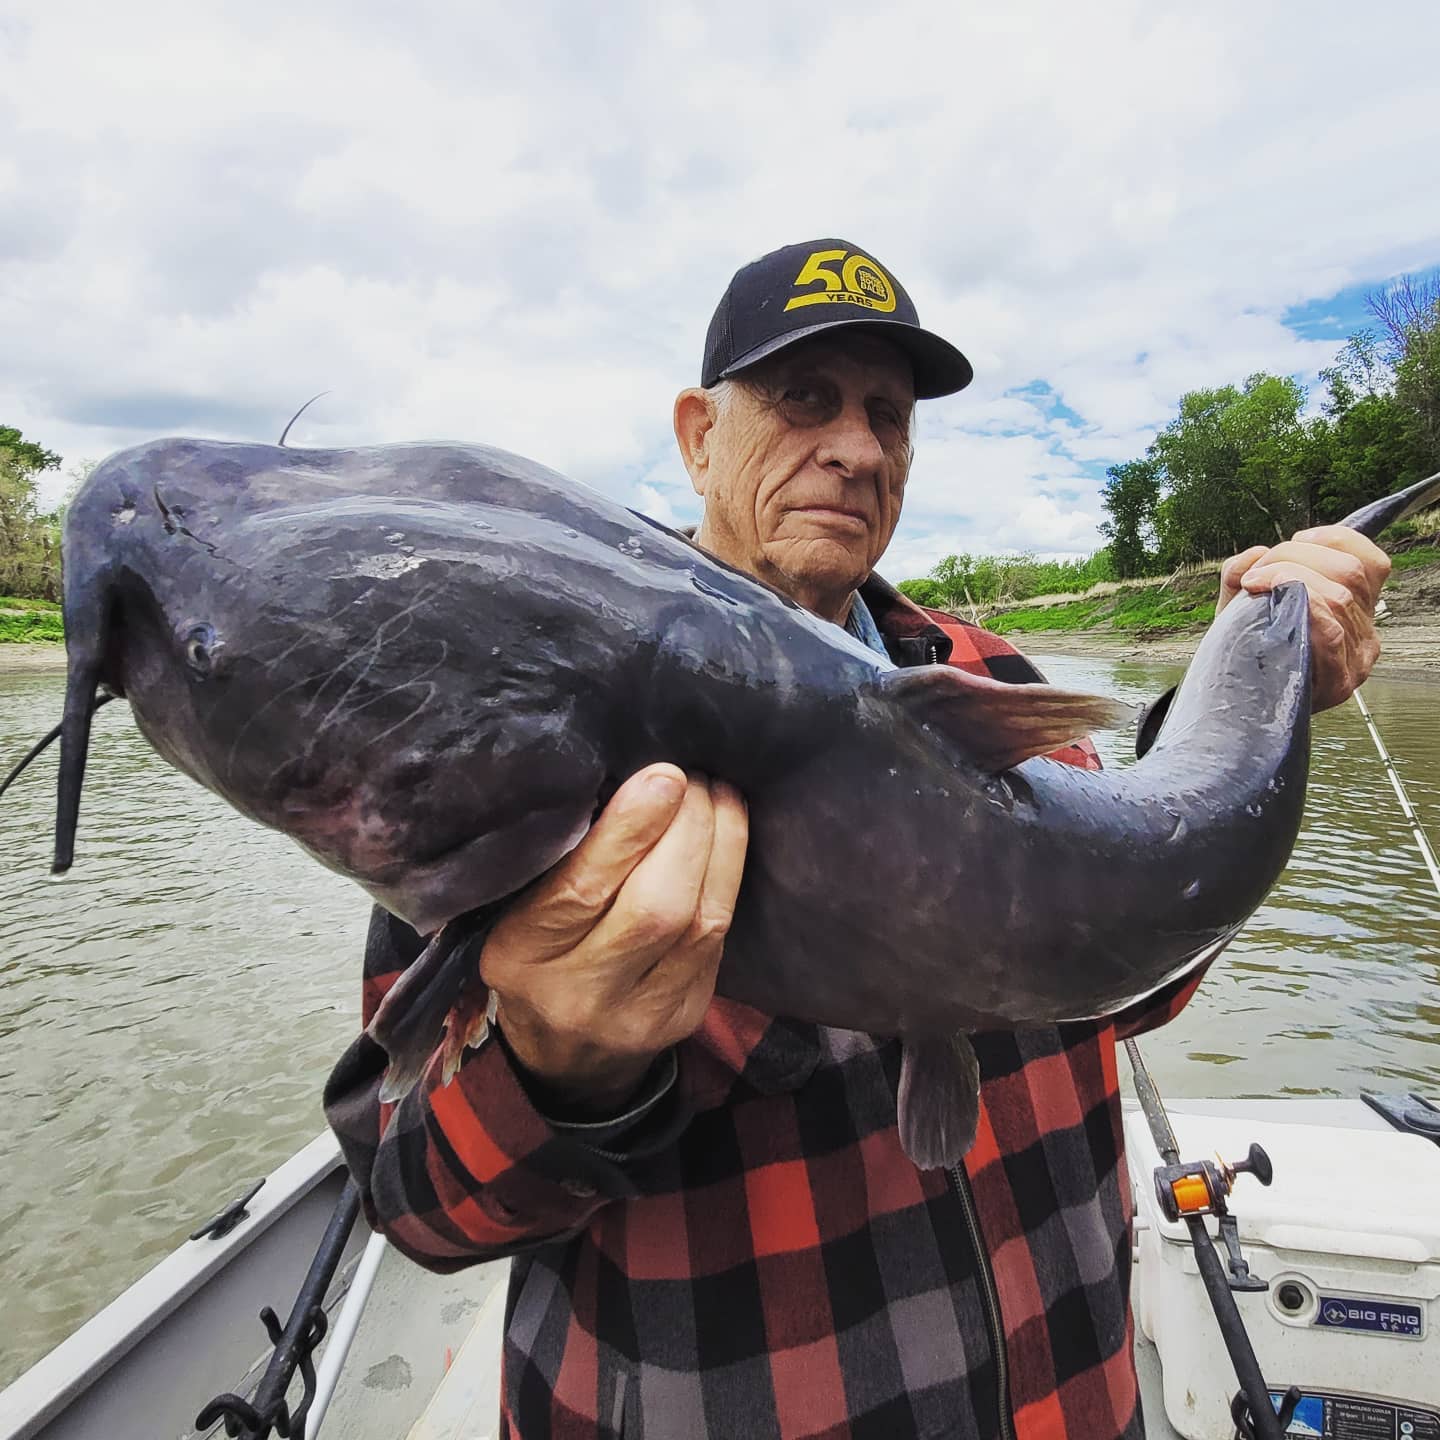 Brad Durick Outdoors, LLC  Guided Channel Cat FIshing on the Red River